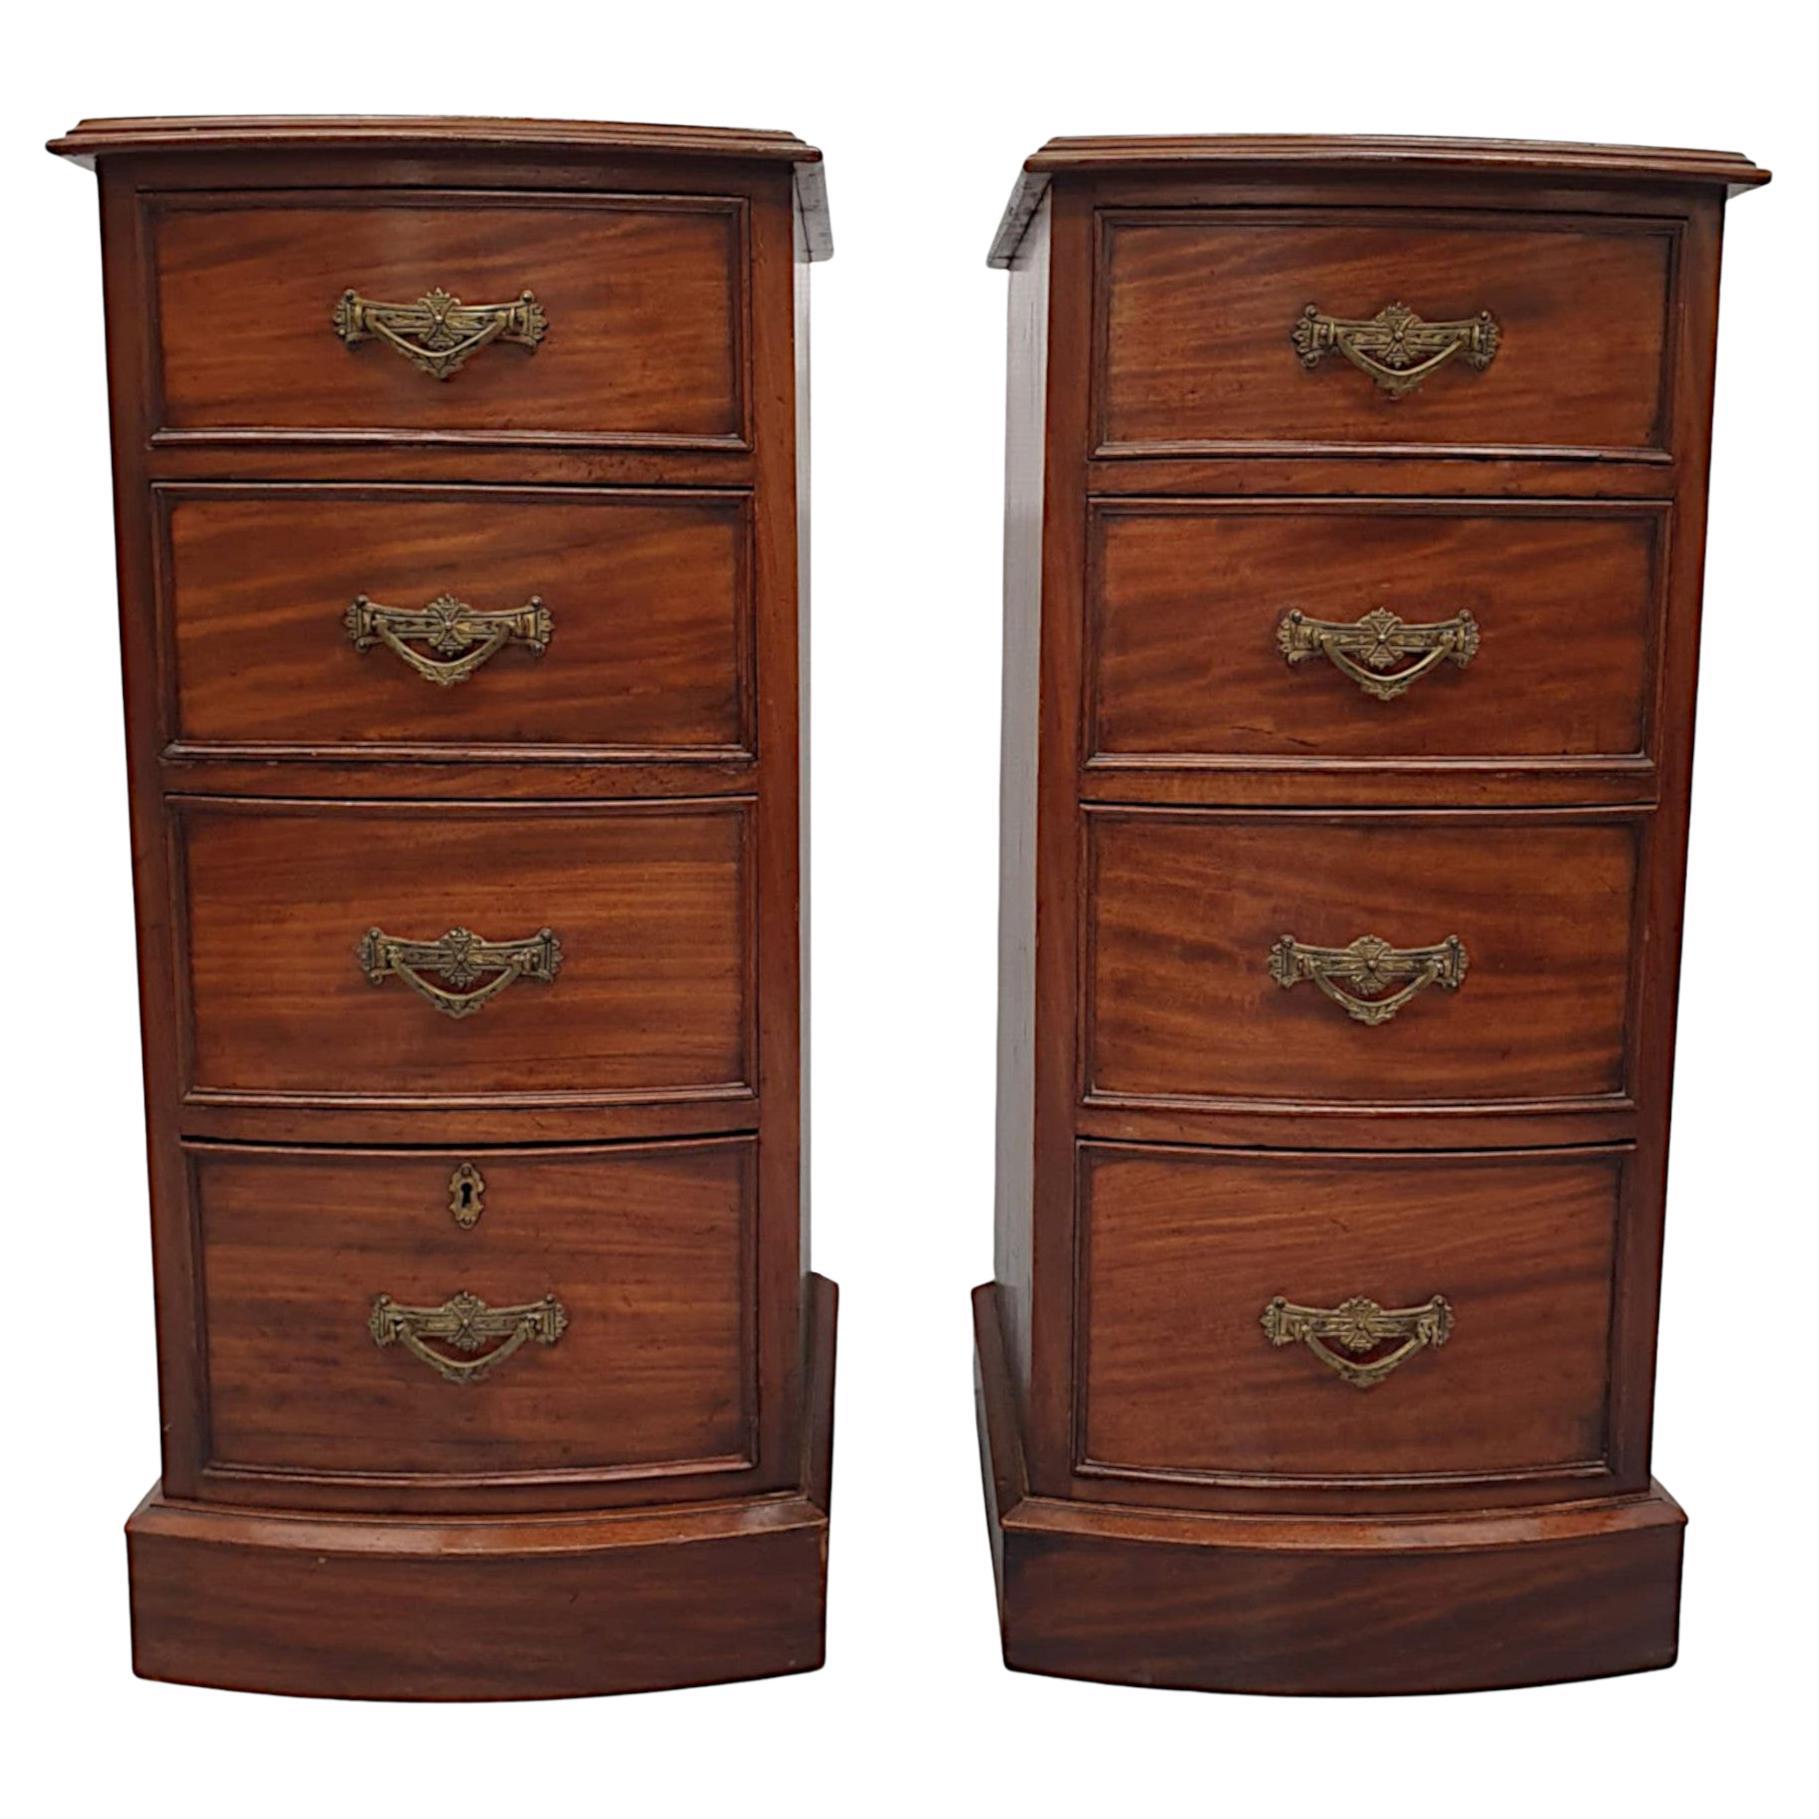 A Very Fine Pair of Large 19th Century Bow Fronted Bedside Chests For Sale